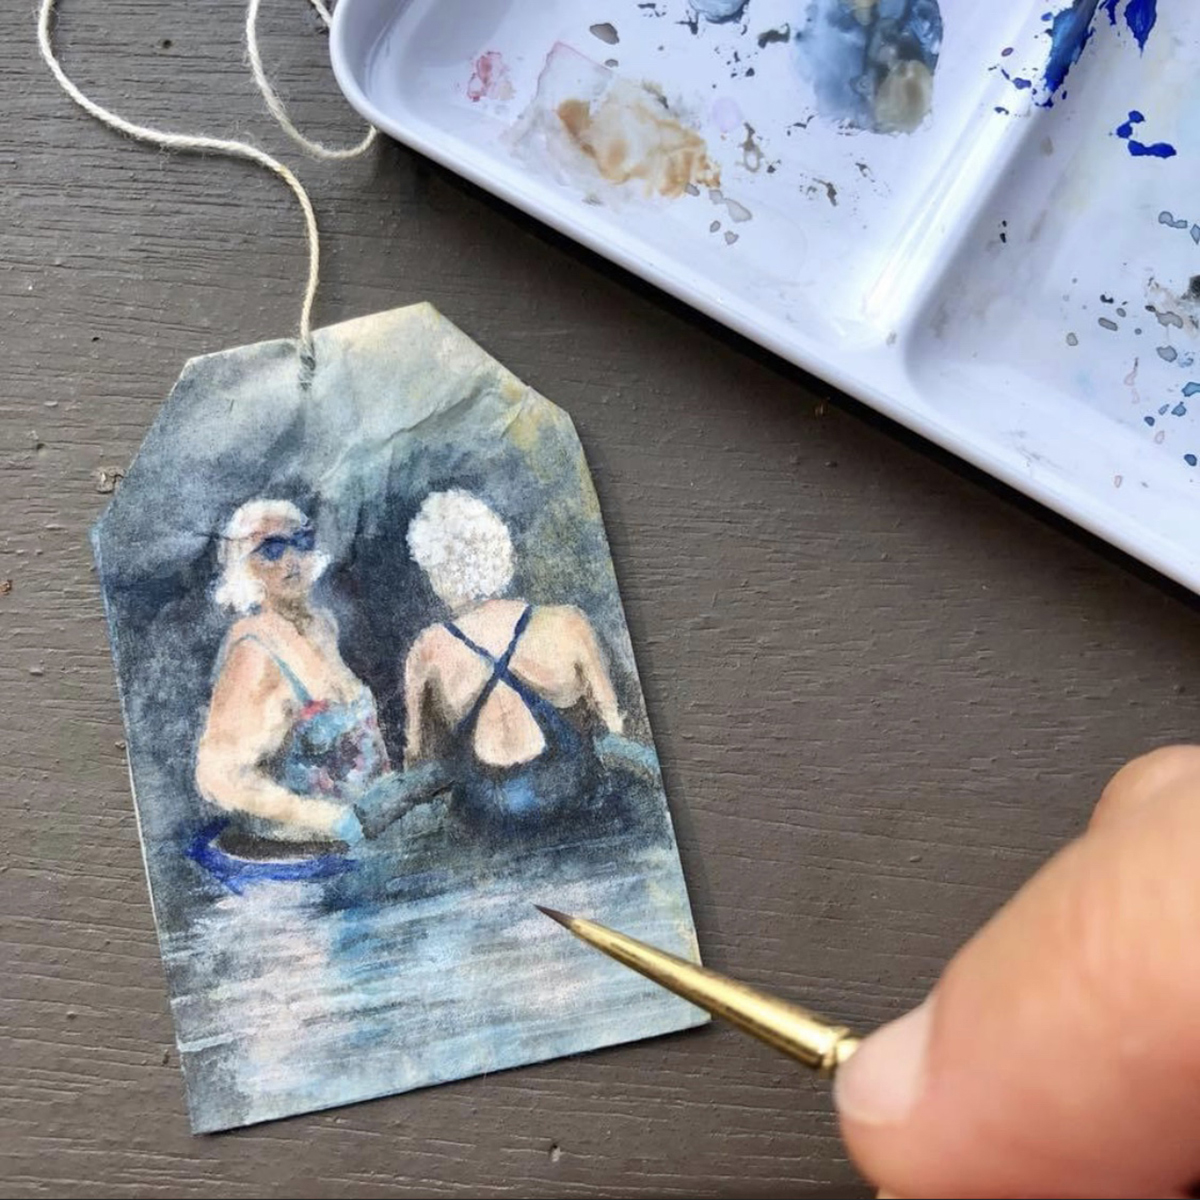 Gorgeous Miniature Watercolors Painted On Used Teabags By Ruby Silvious 20